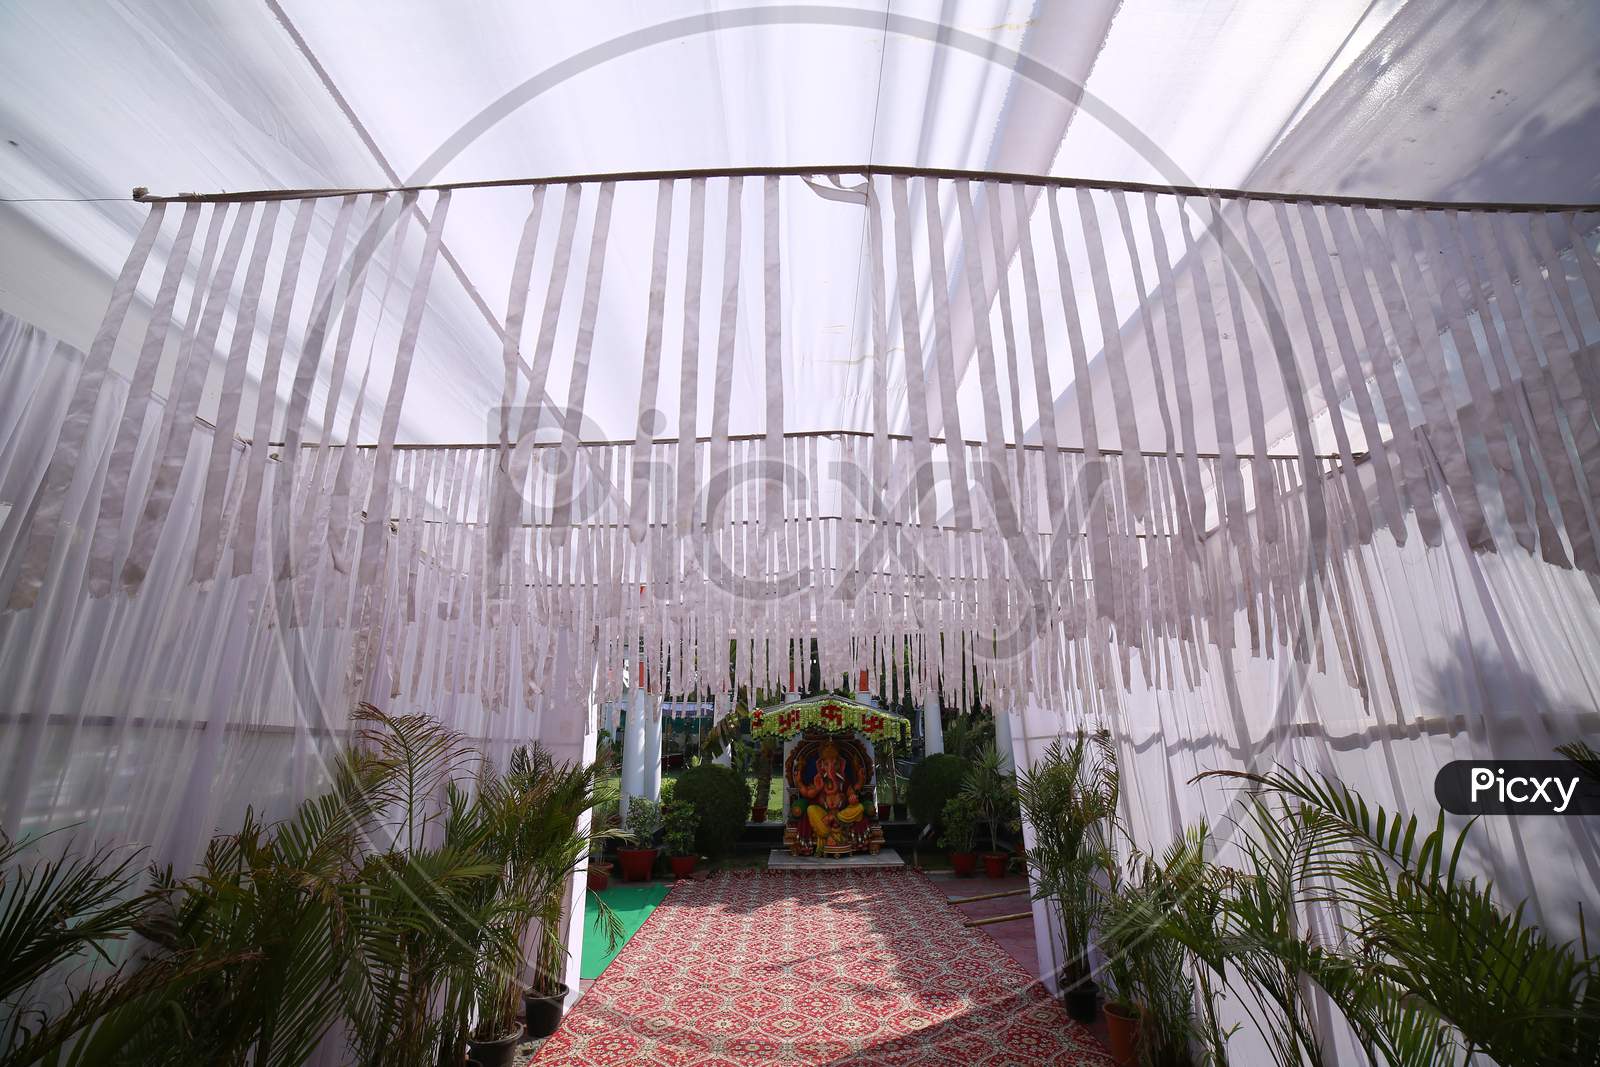 Decorated Stages With Fresh Blooming Flowers At Indian Wedding Ceremony